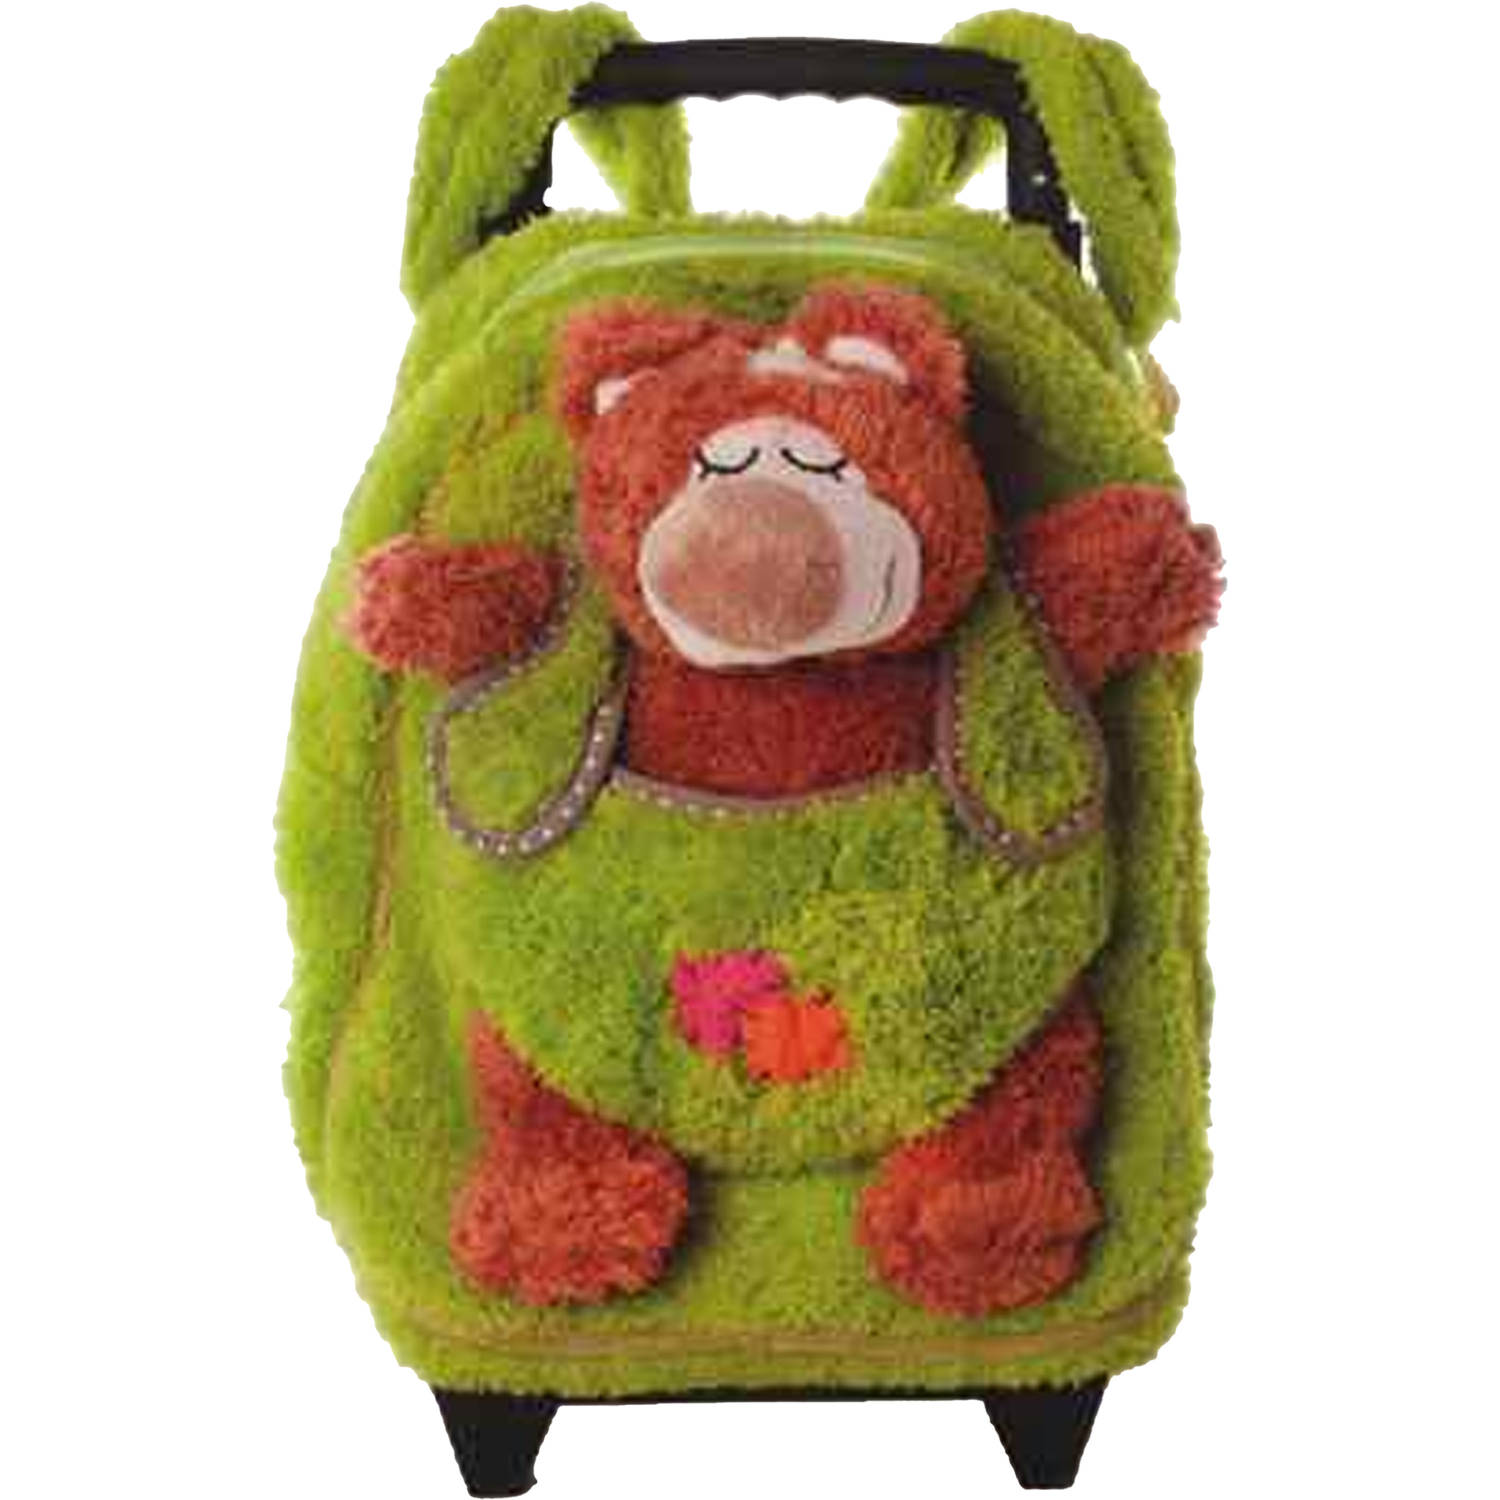 Inware Rugzaktrolley kinderkoffer - pluche beer knuffel - kunststof/polyester - 35 x 25 x 13 cm